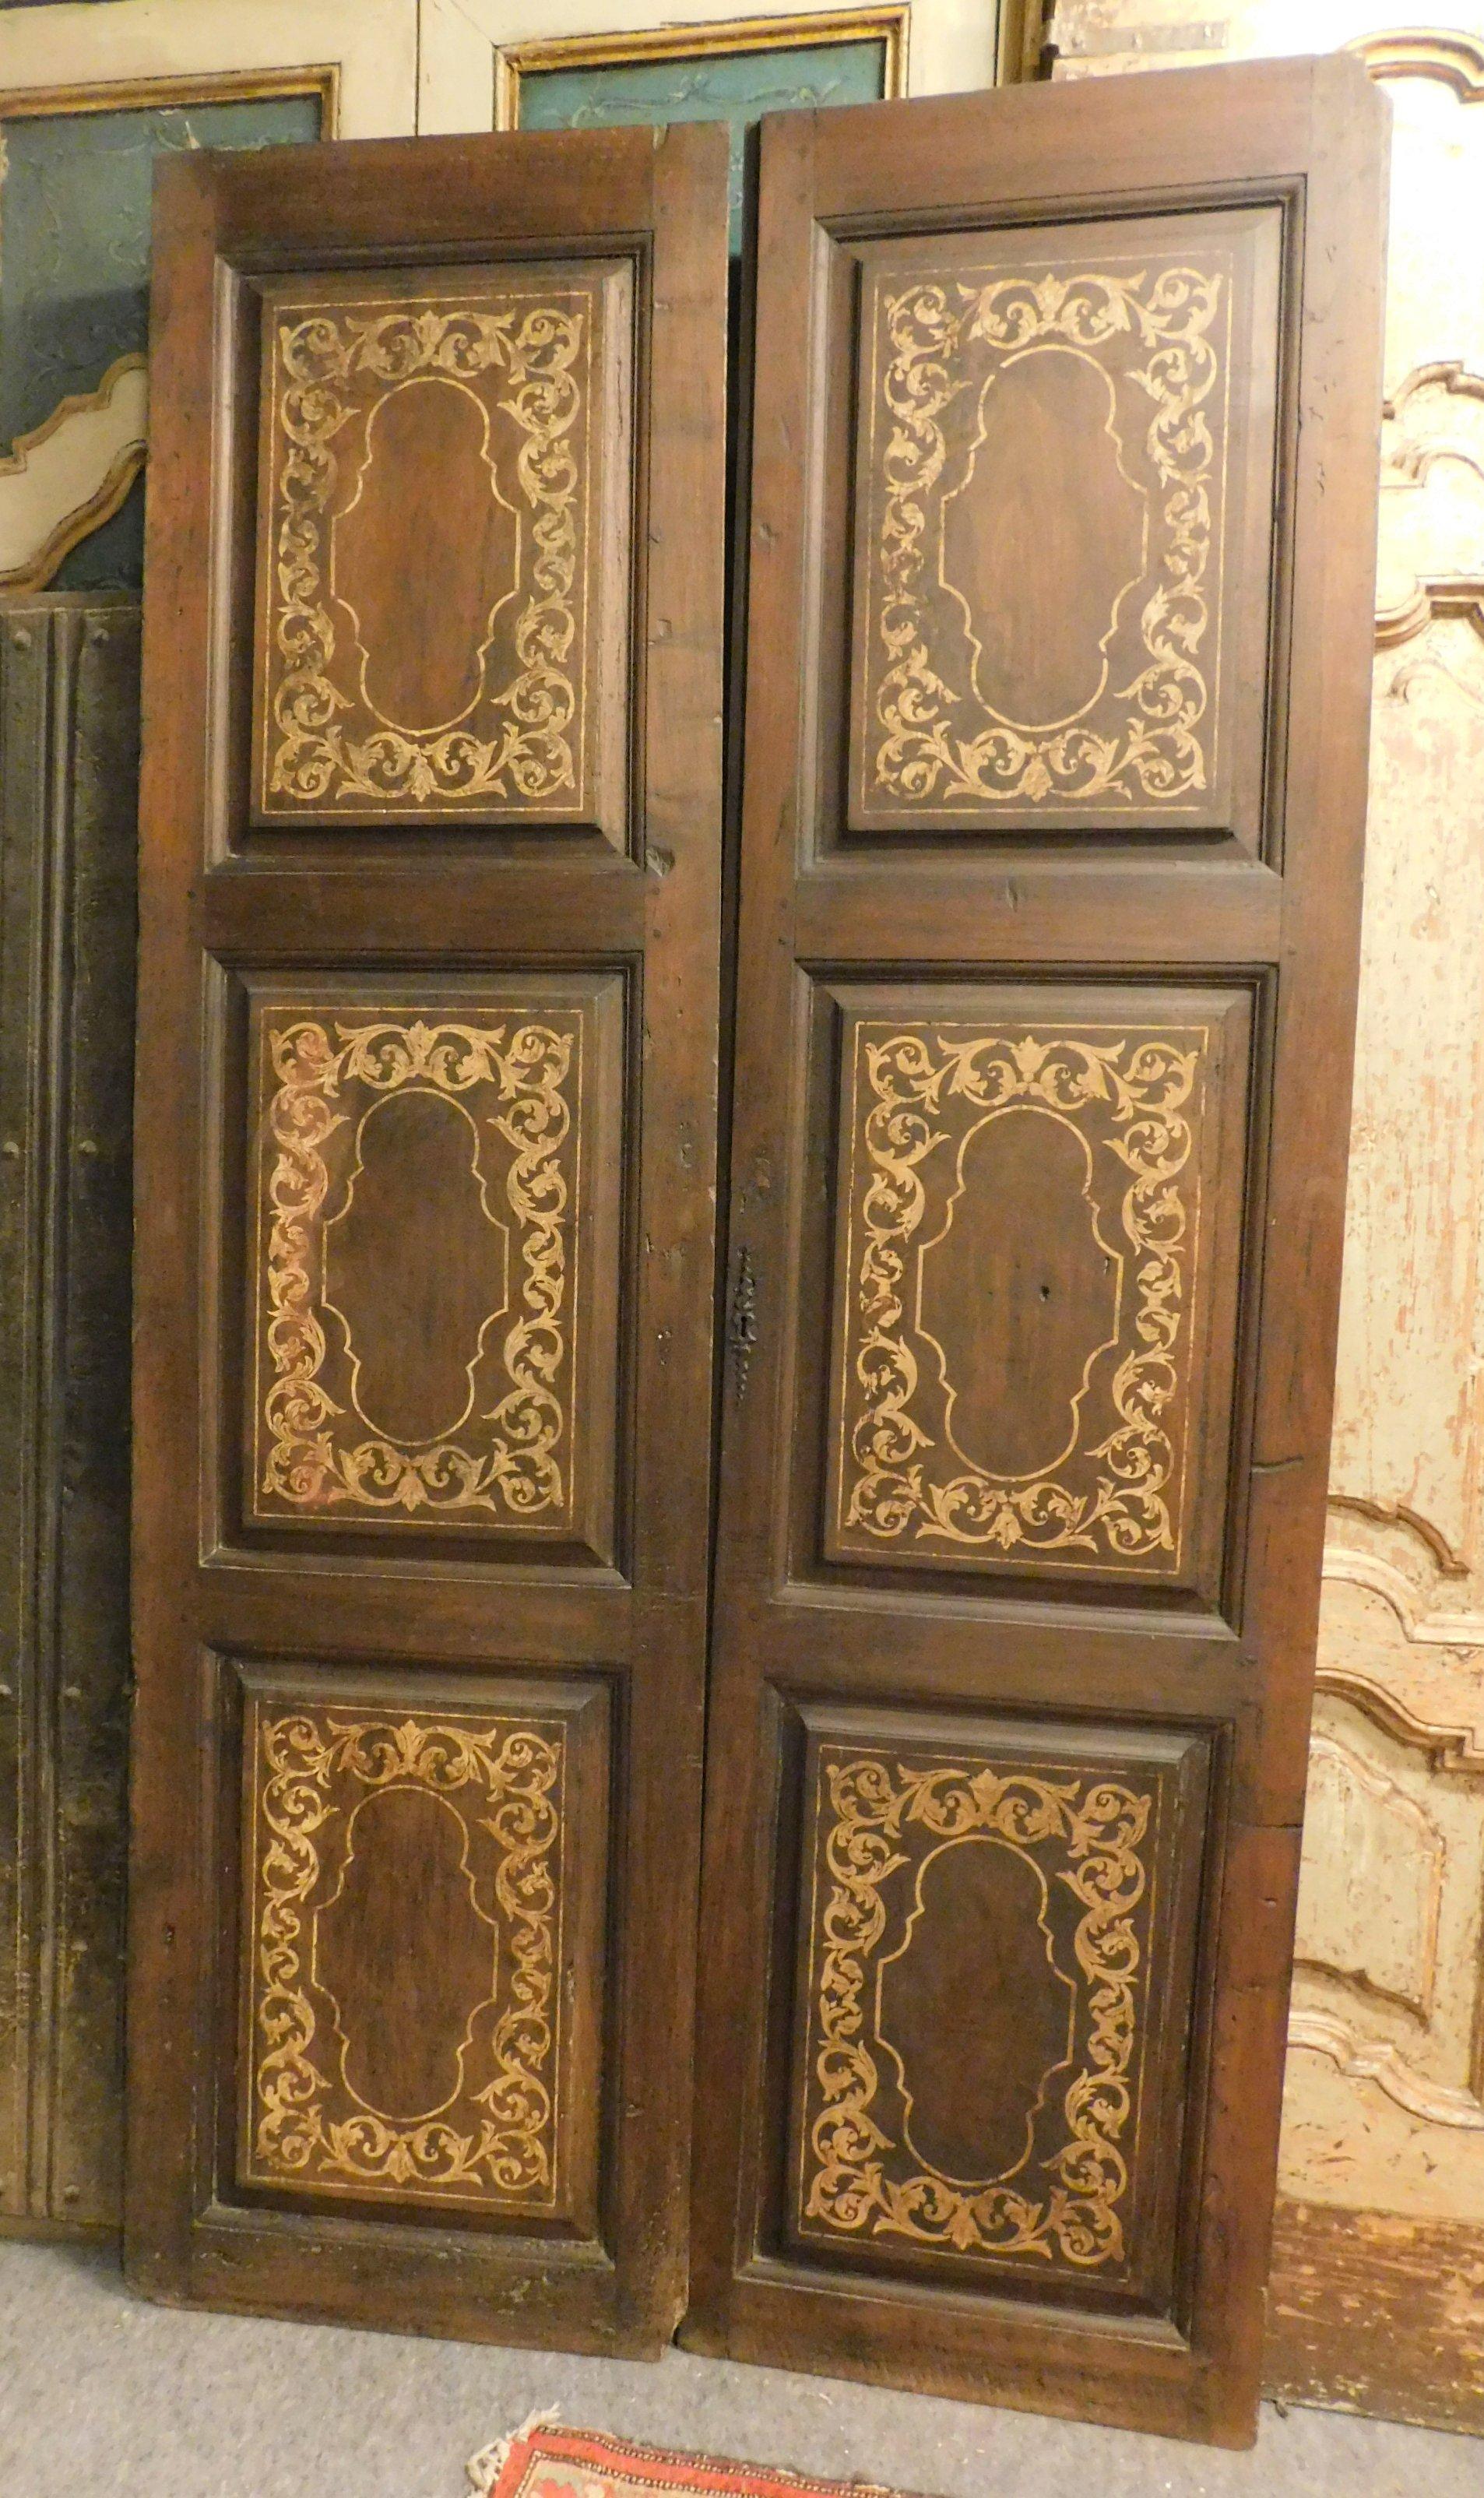 Ancient double door in precious walnut wood, with two leaves with light and dark inlays, with typical tiles of the time, without hinges, they can be used as panels or adapted with any hinge you want, built by hand in the middle of the 18th century